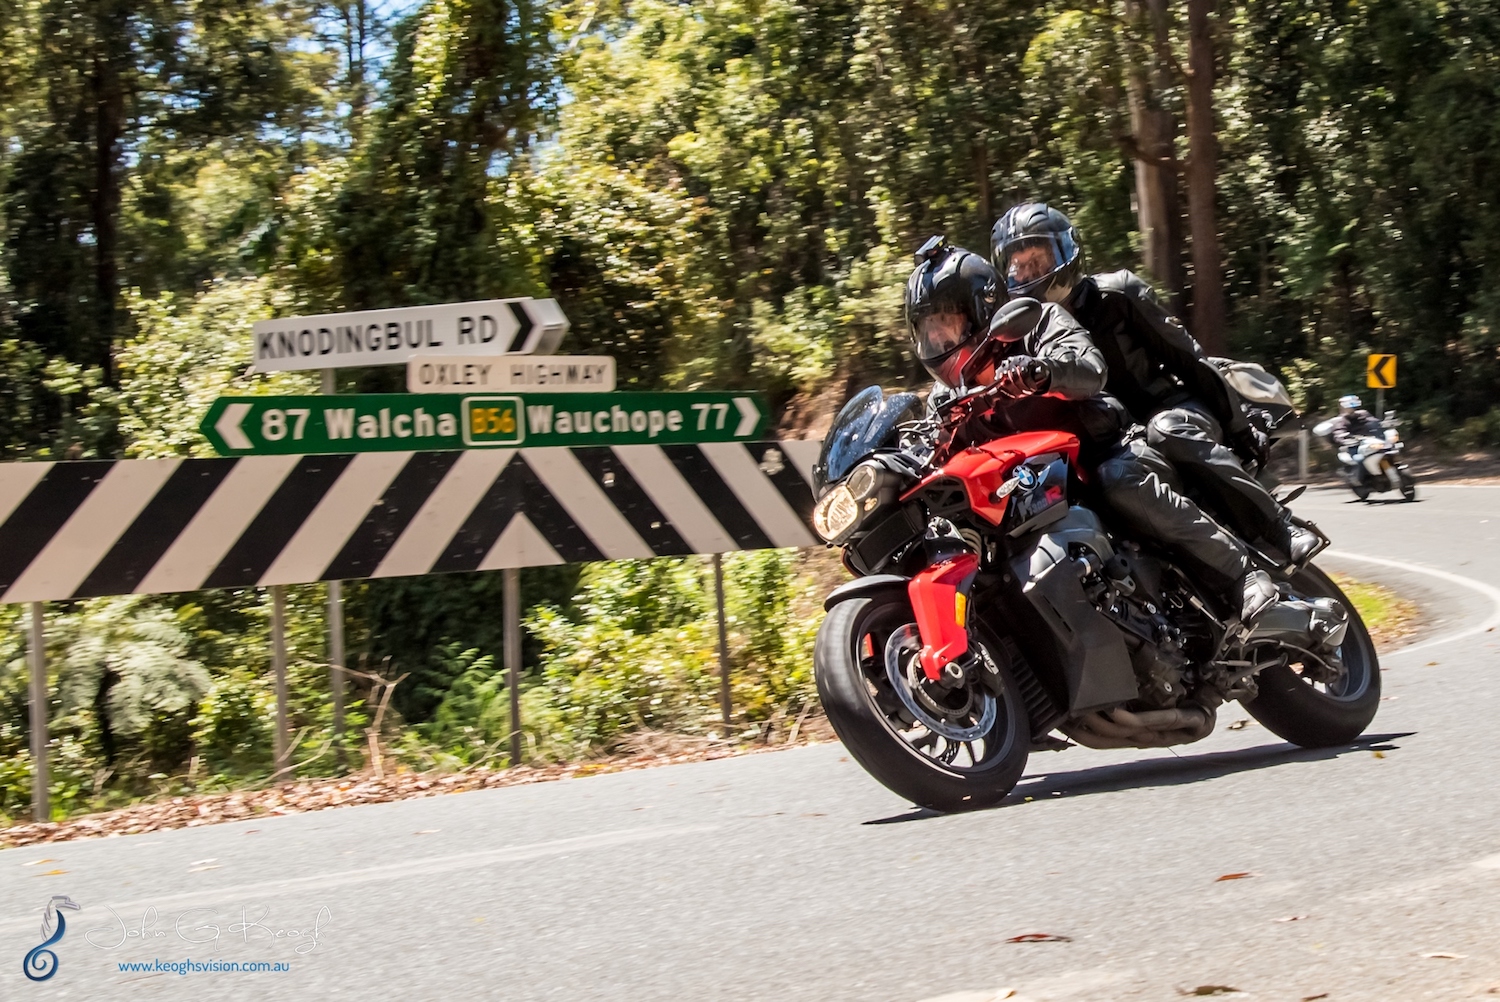 Save the Oxley organiser Ken Healey on his BMW K 1300 R - Motorcycle Friendly Town (Photo: Keoghs Vision Photography) reprieve